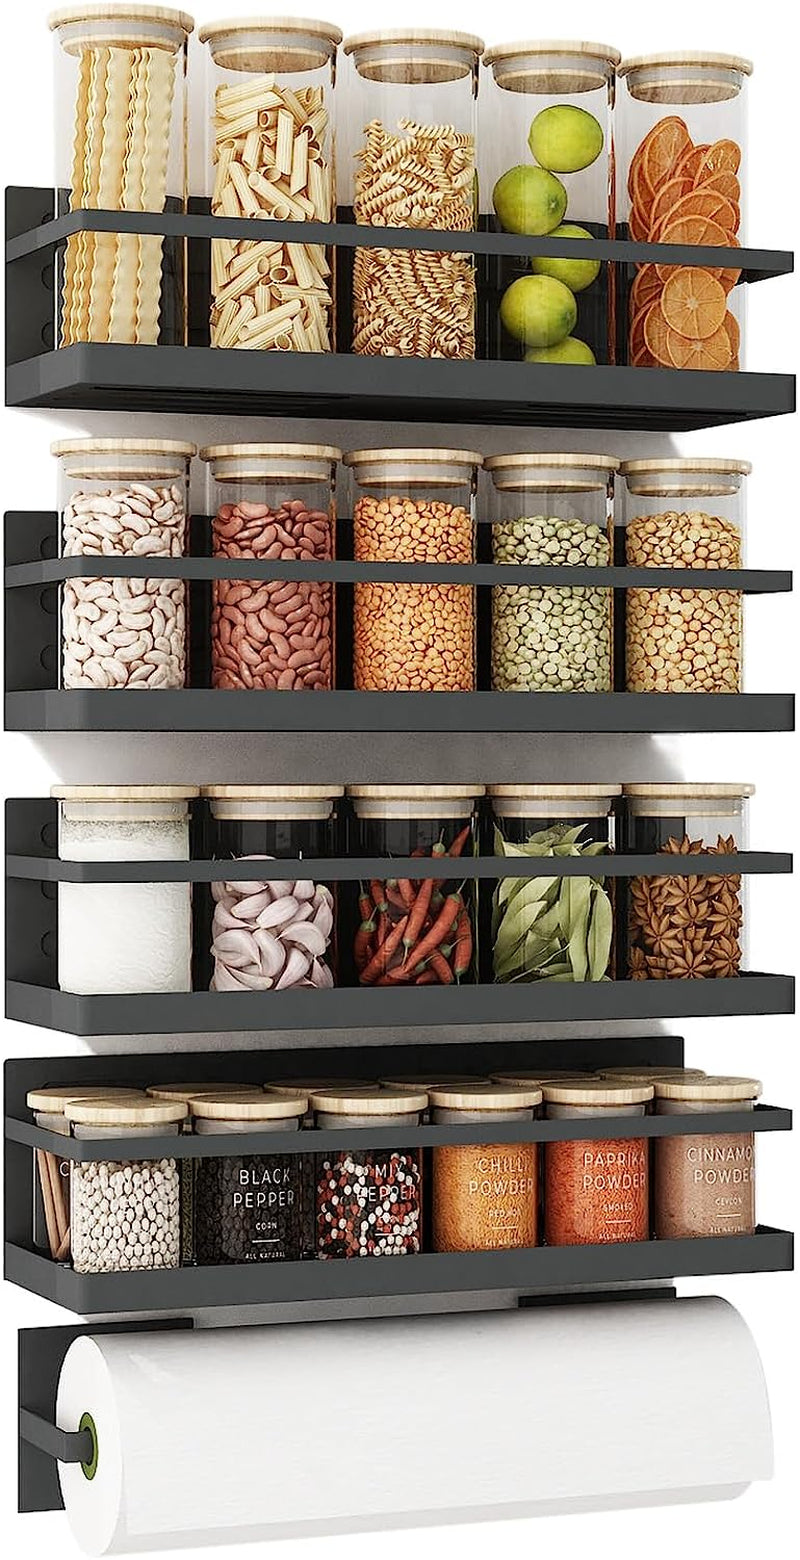 Magnetic Spice Rack, Shelf for Refrigerator or Microwave With Magnetic Paper Towel Holder-2 or 4 Pack